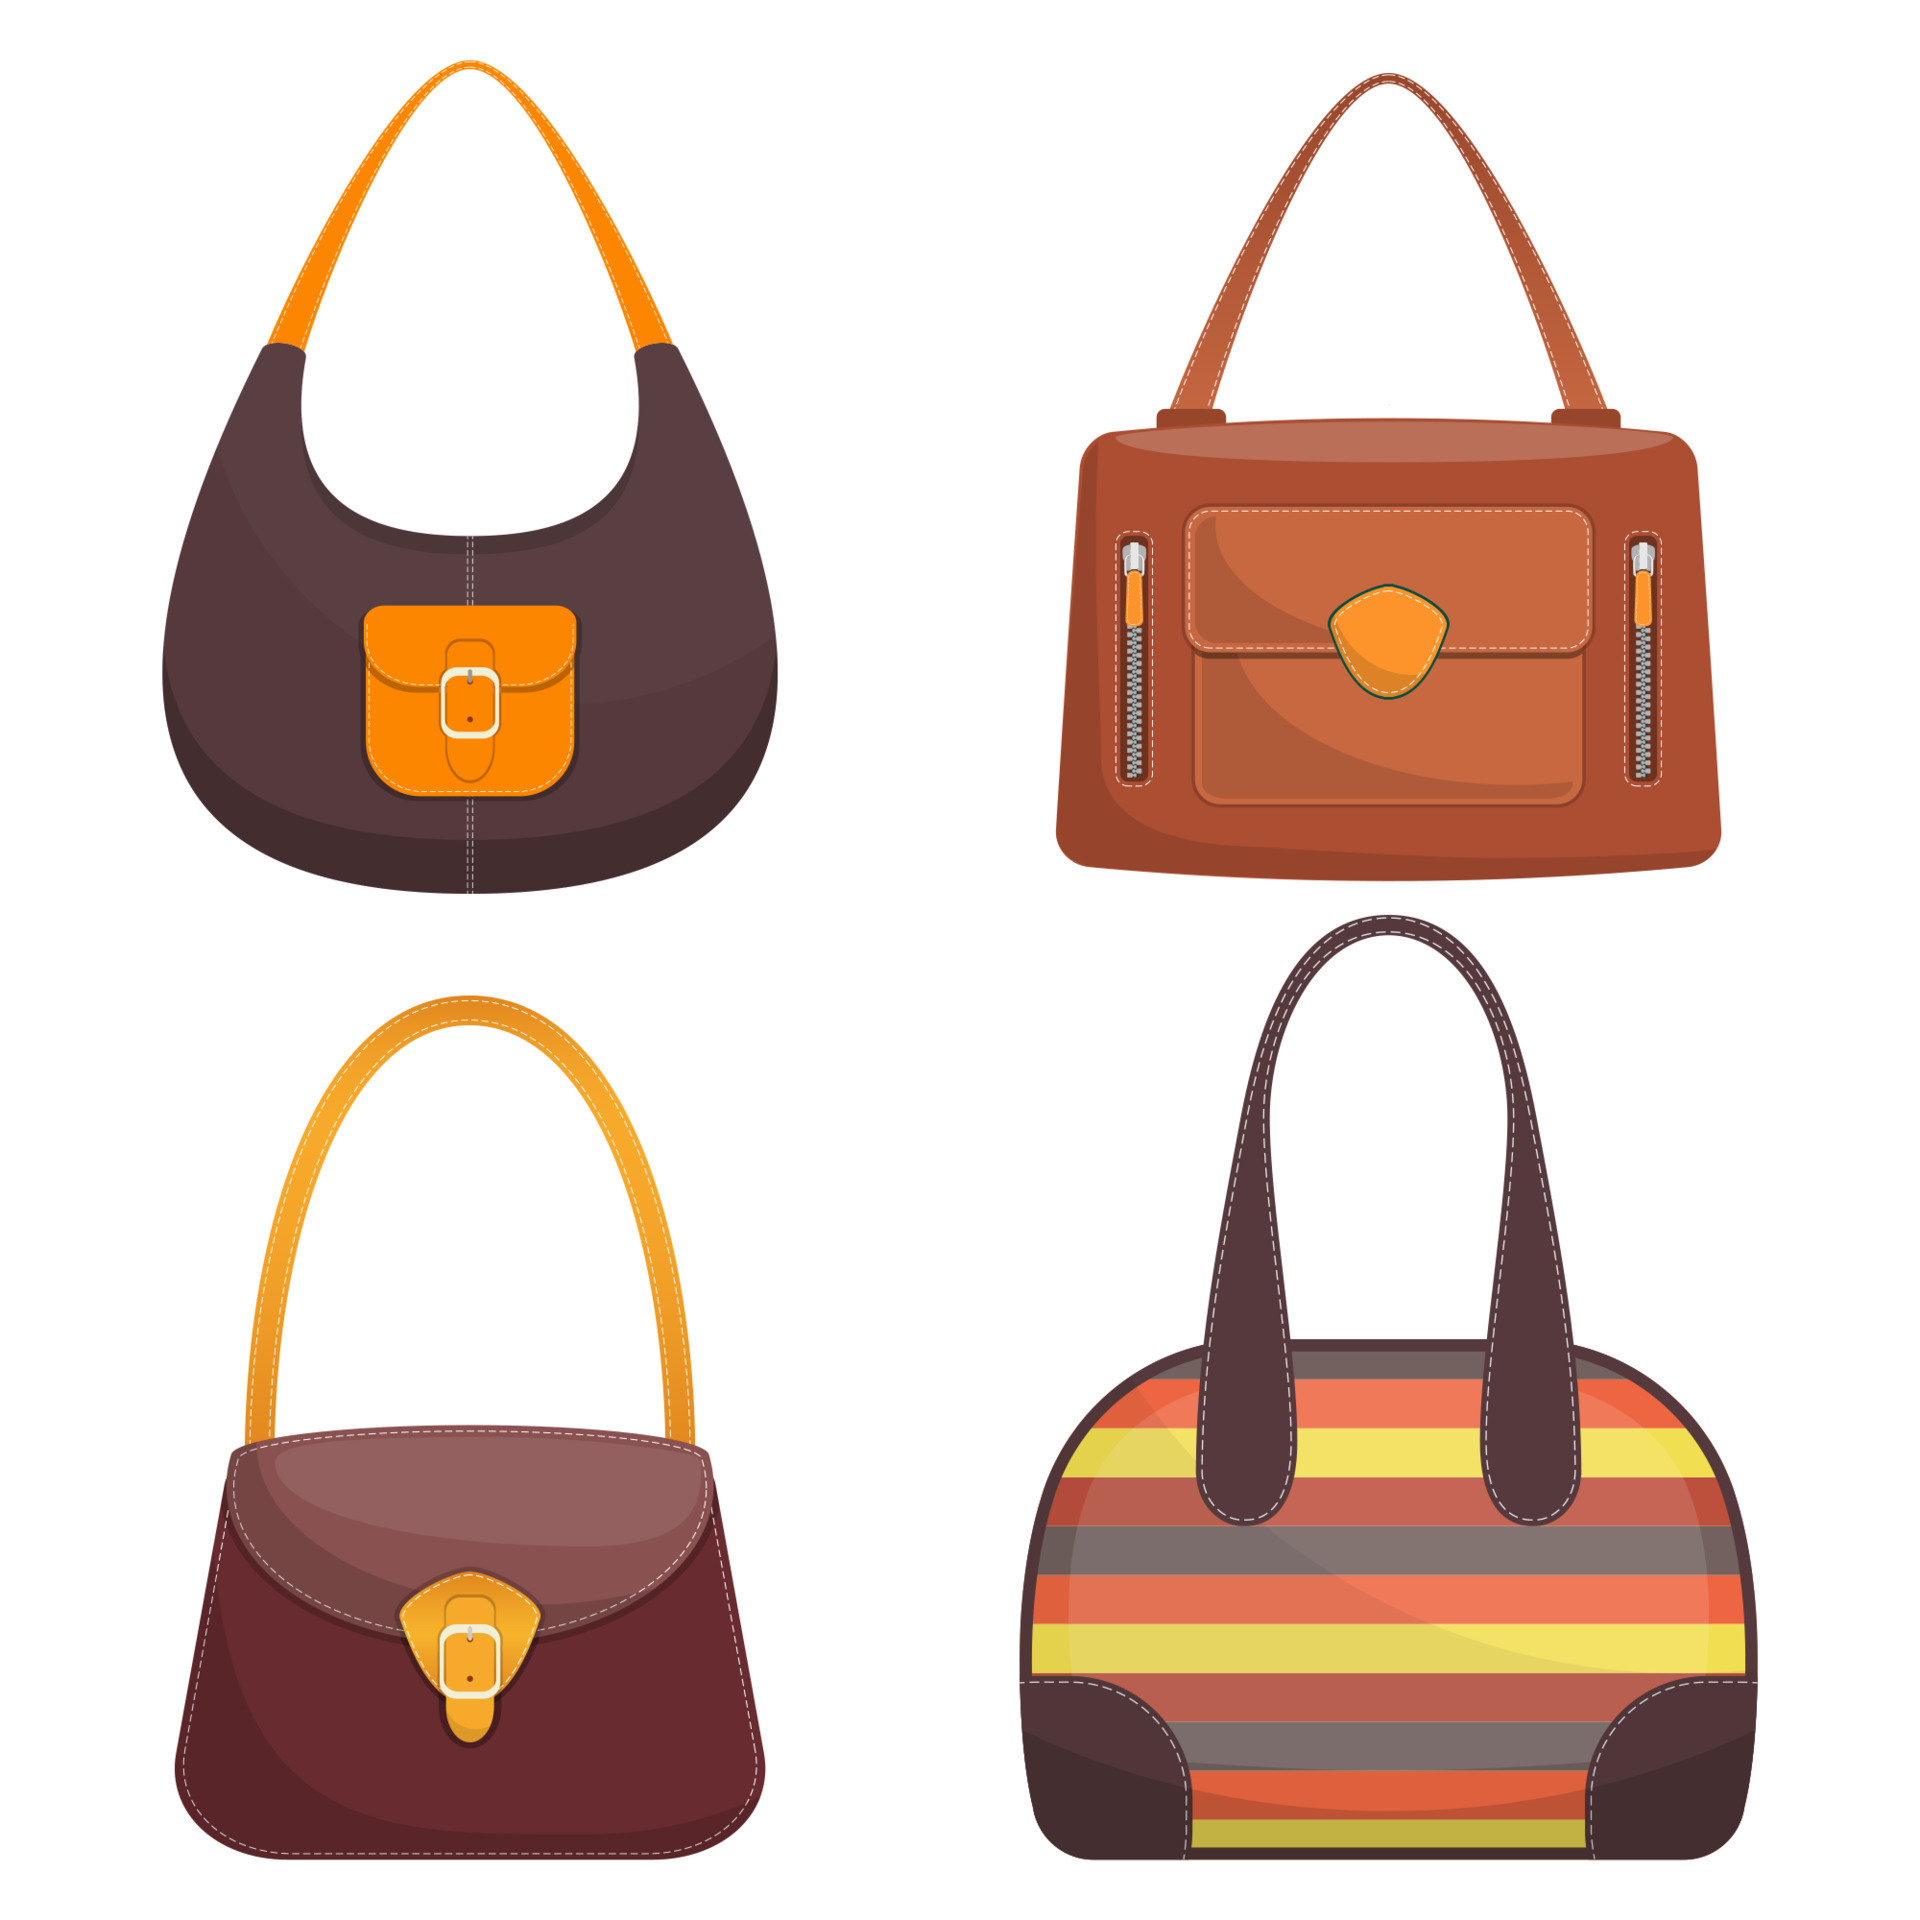 Premium Vector  Set of colorful fashion bags icons isolated on white  cartoon style vector illustration